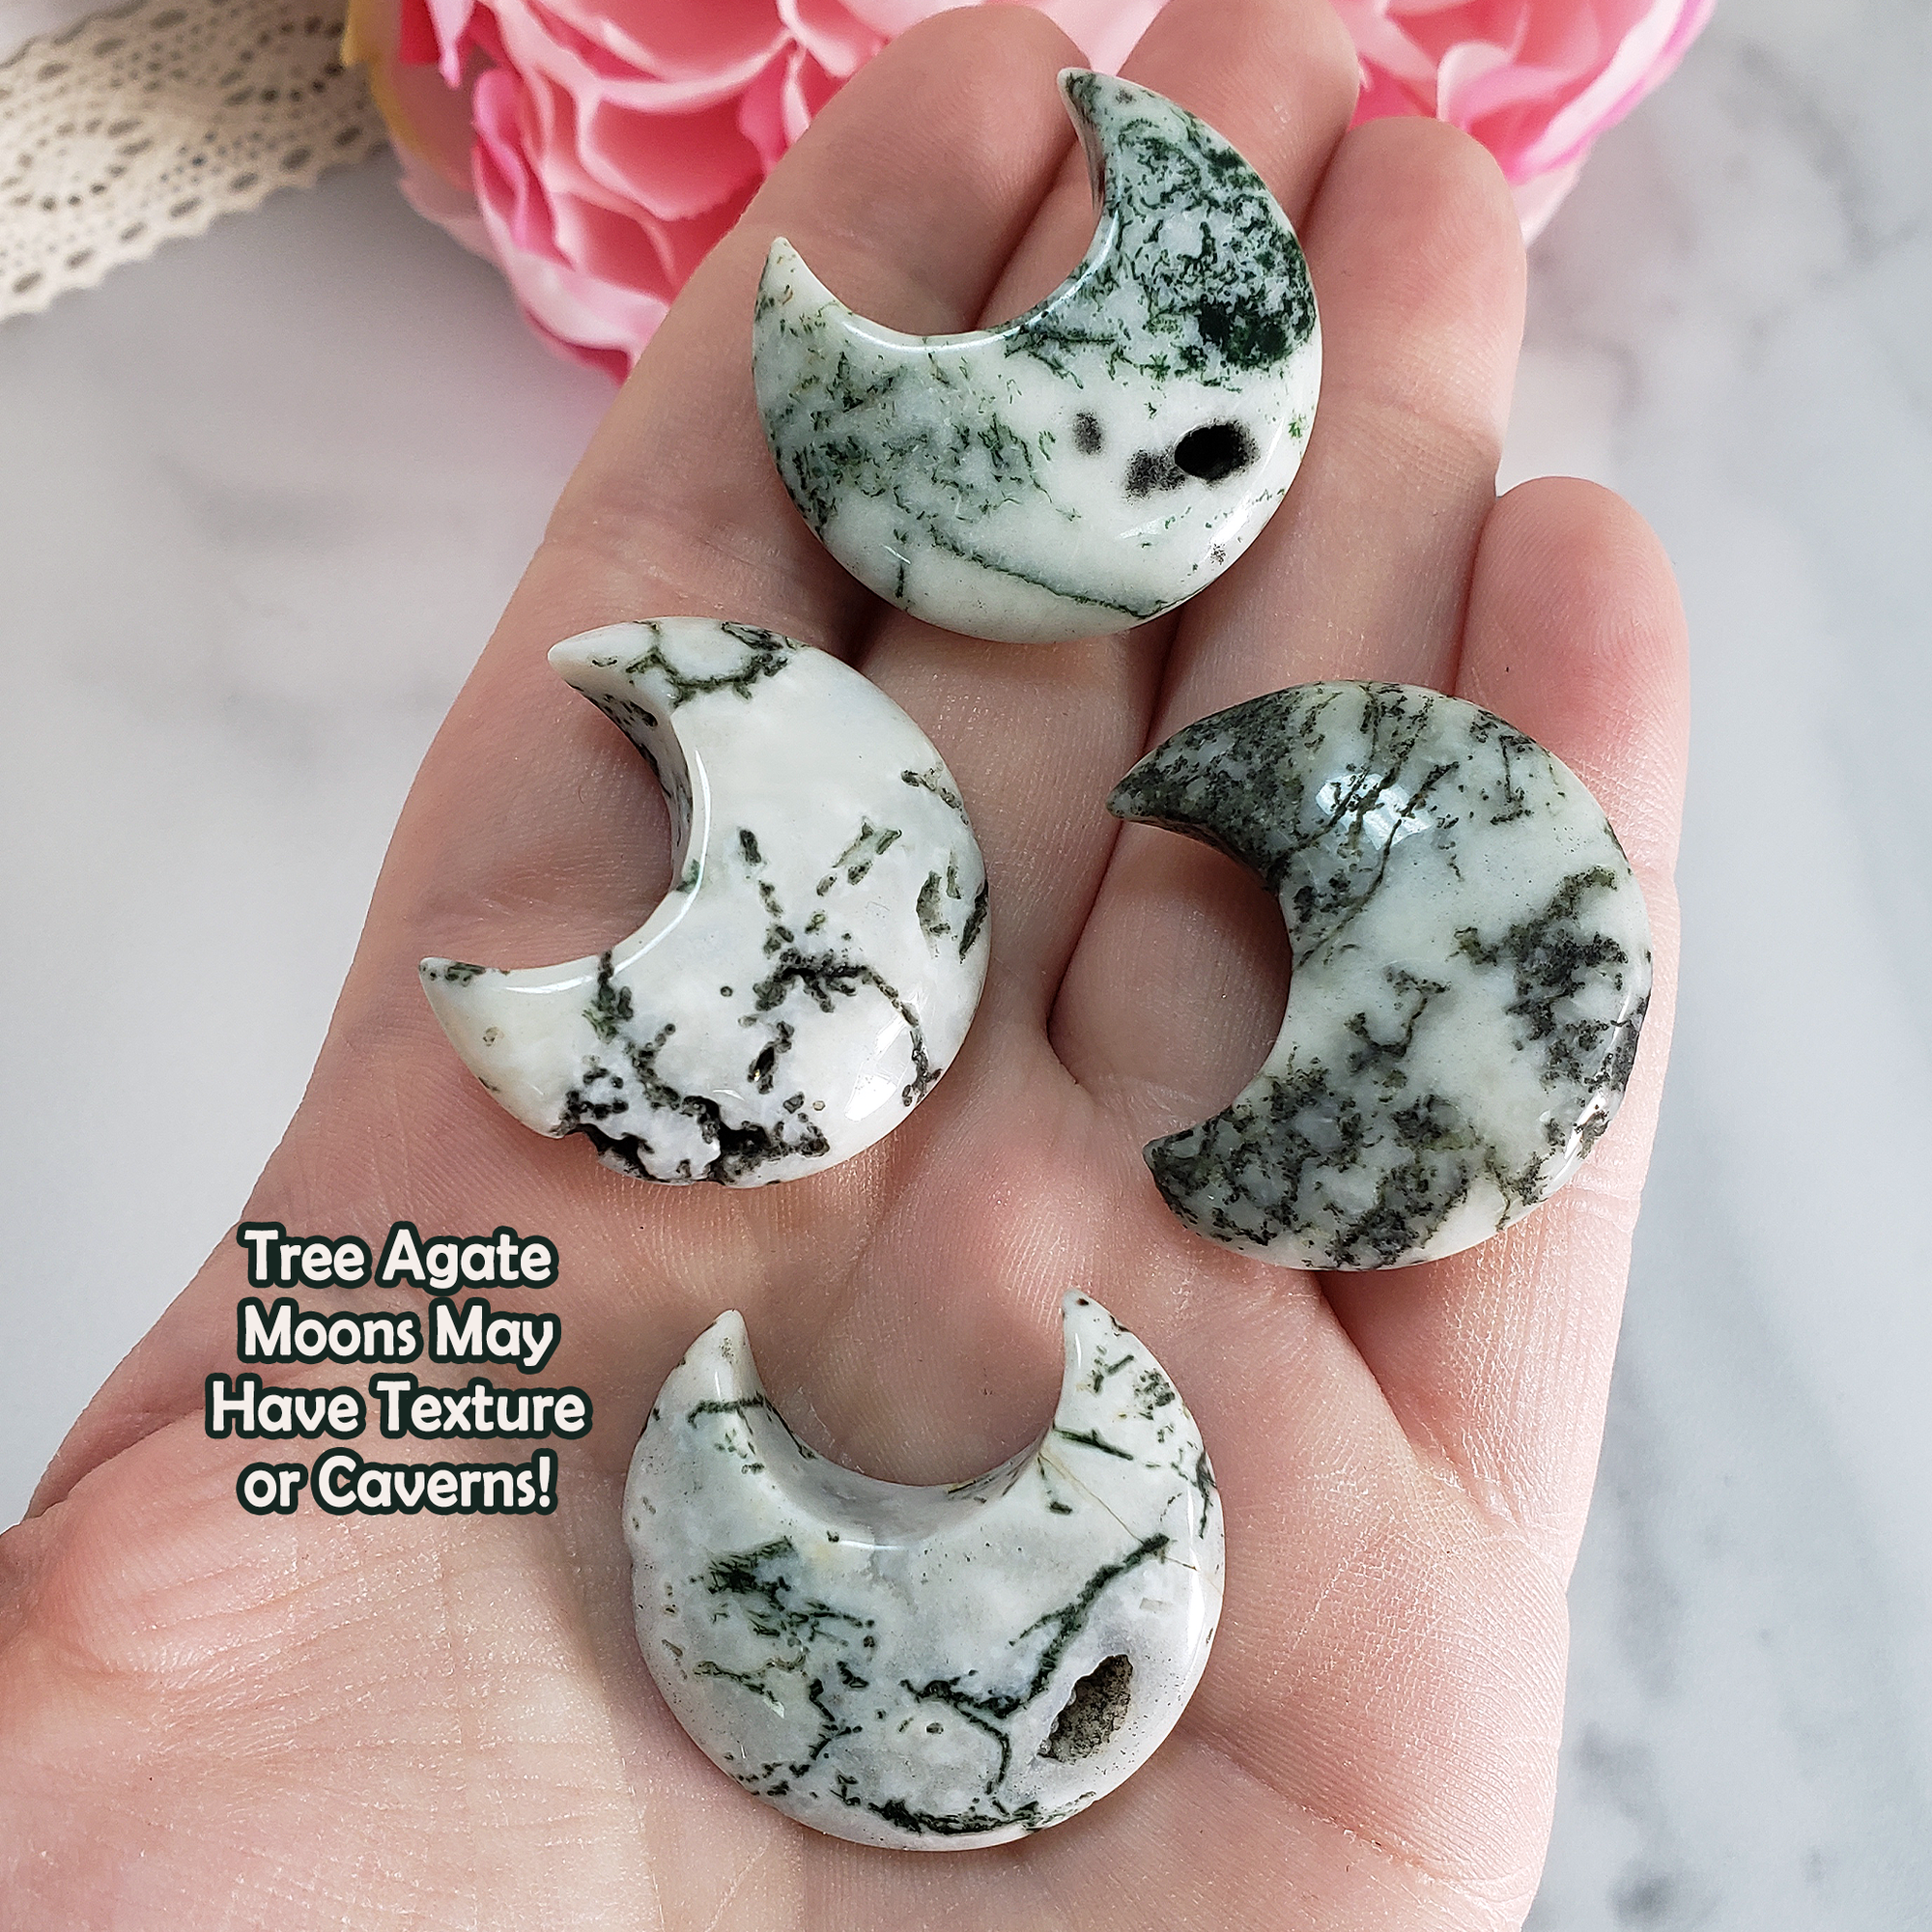 Tree Agate Natural Gemstone Crescent Moon Carving Fidget Stone - Tree Agate Moons May Feature Texture or Natural Druzy Caverns